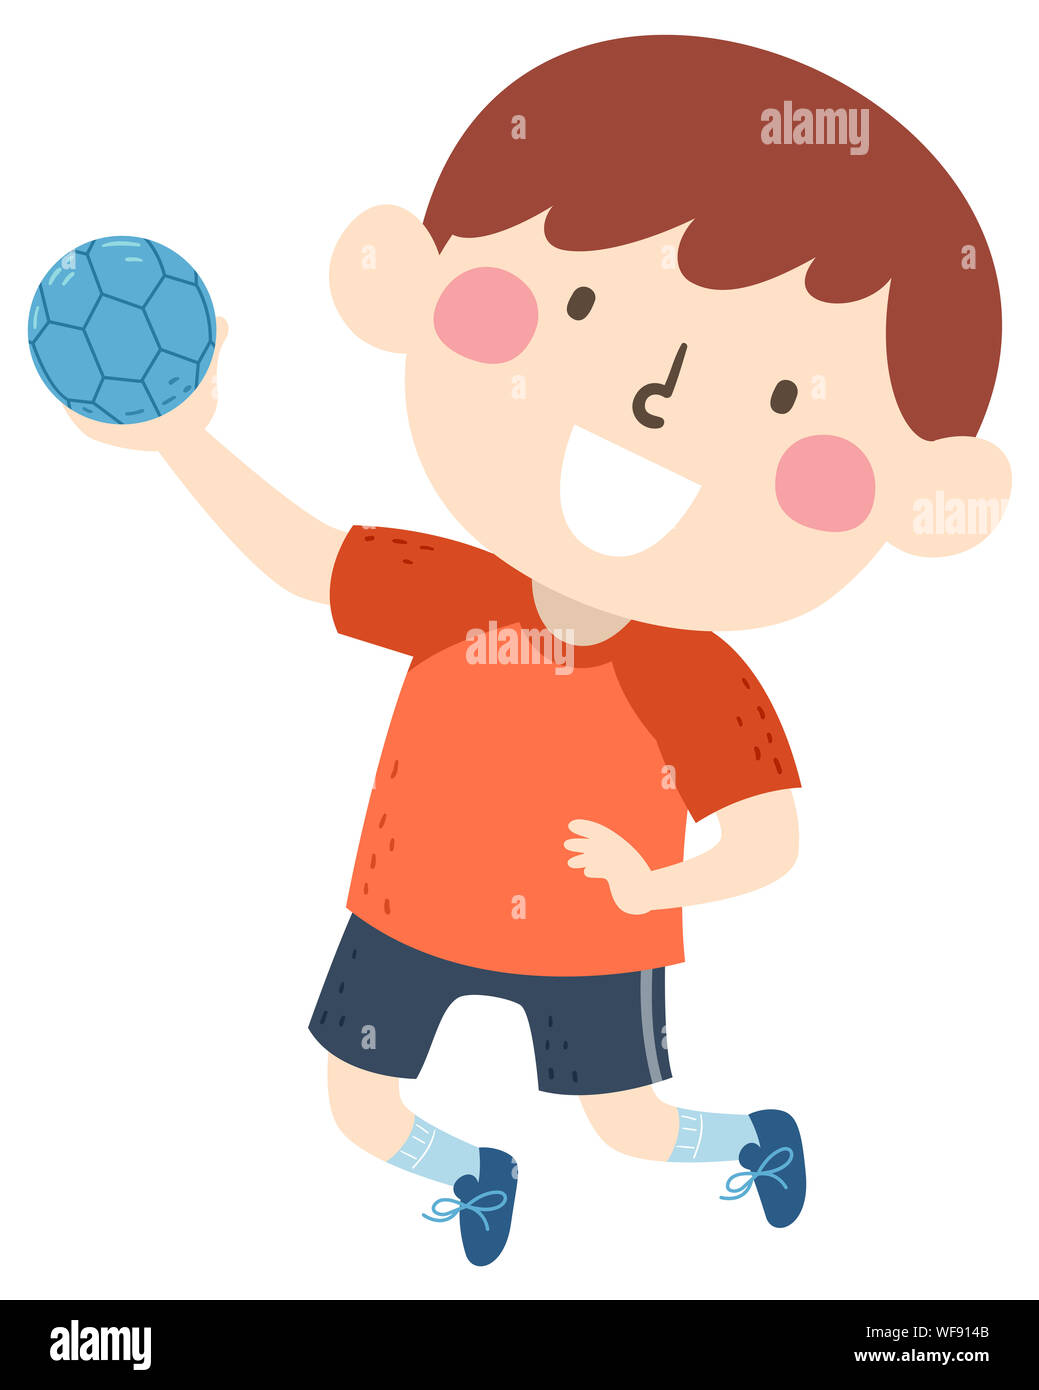 Illustration of a Kid Boy Holding a Ball in His Hand, Playing Handball Stock Photo